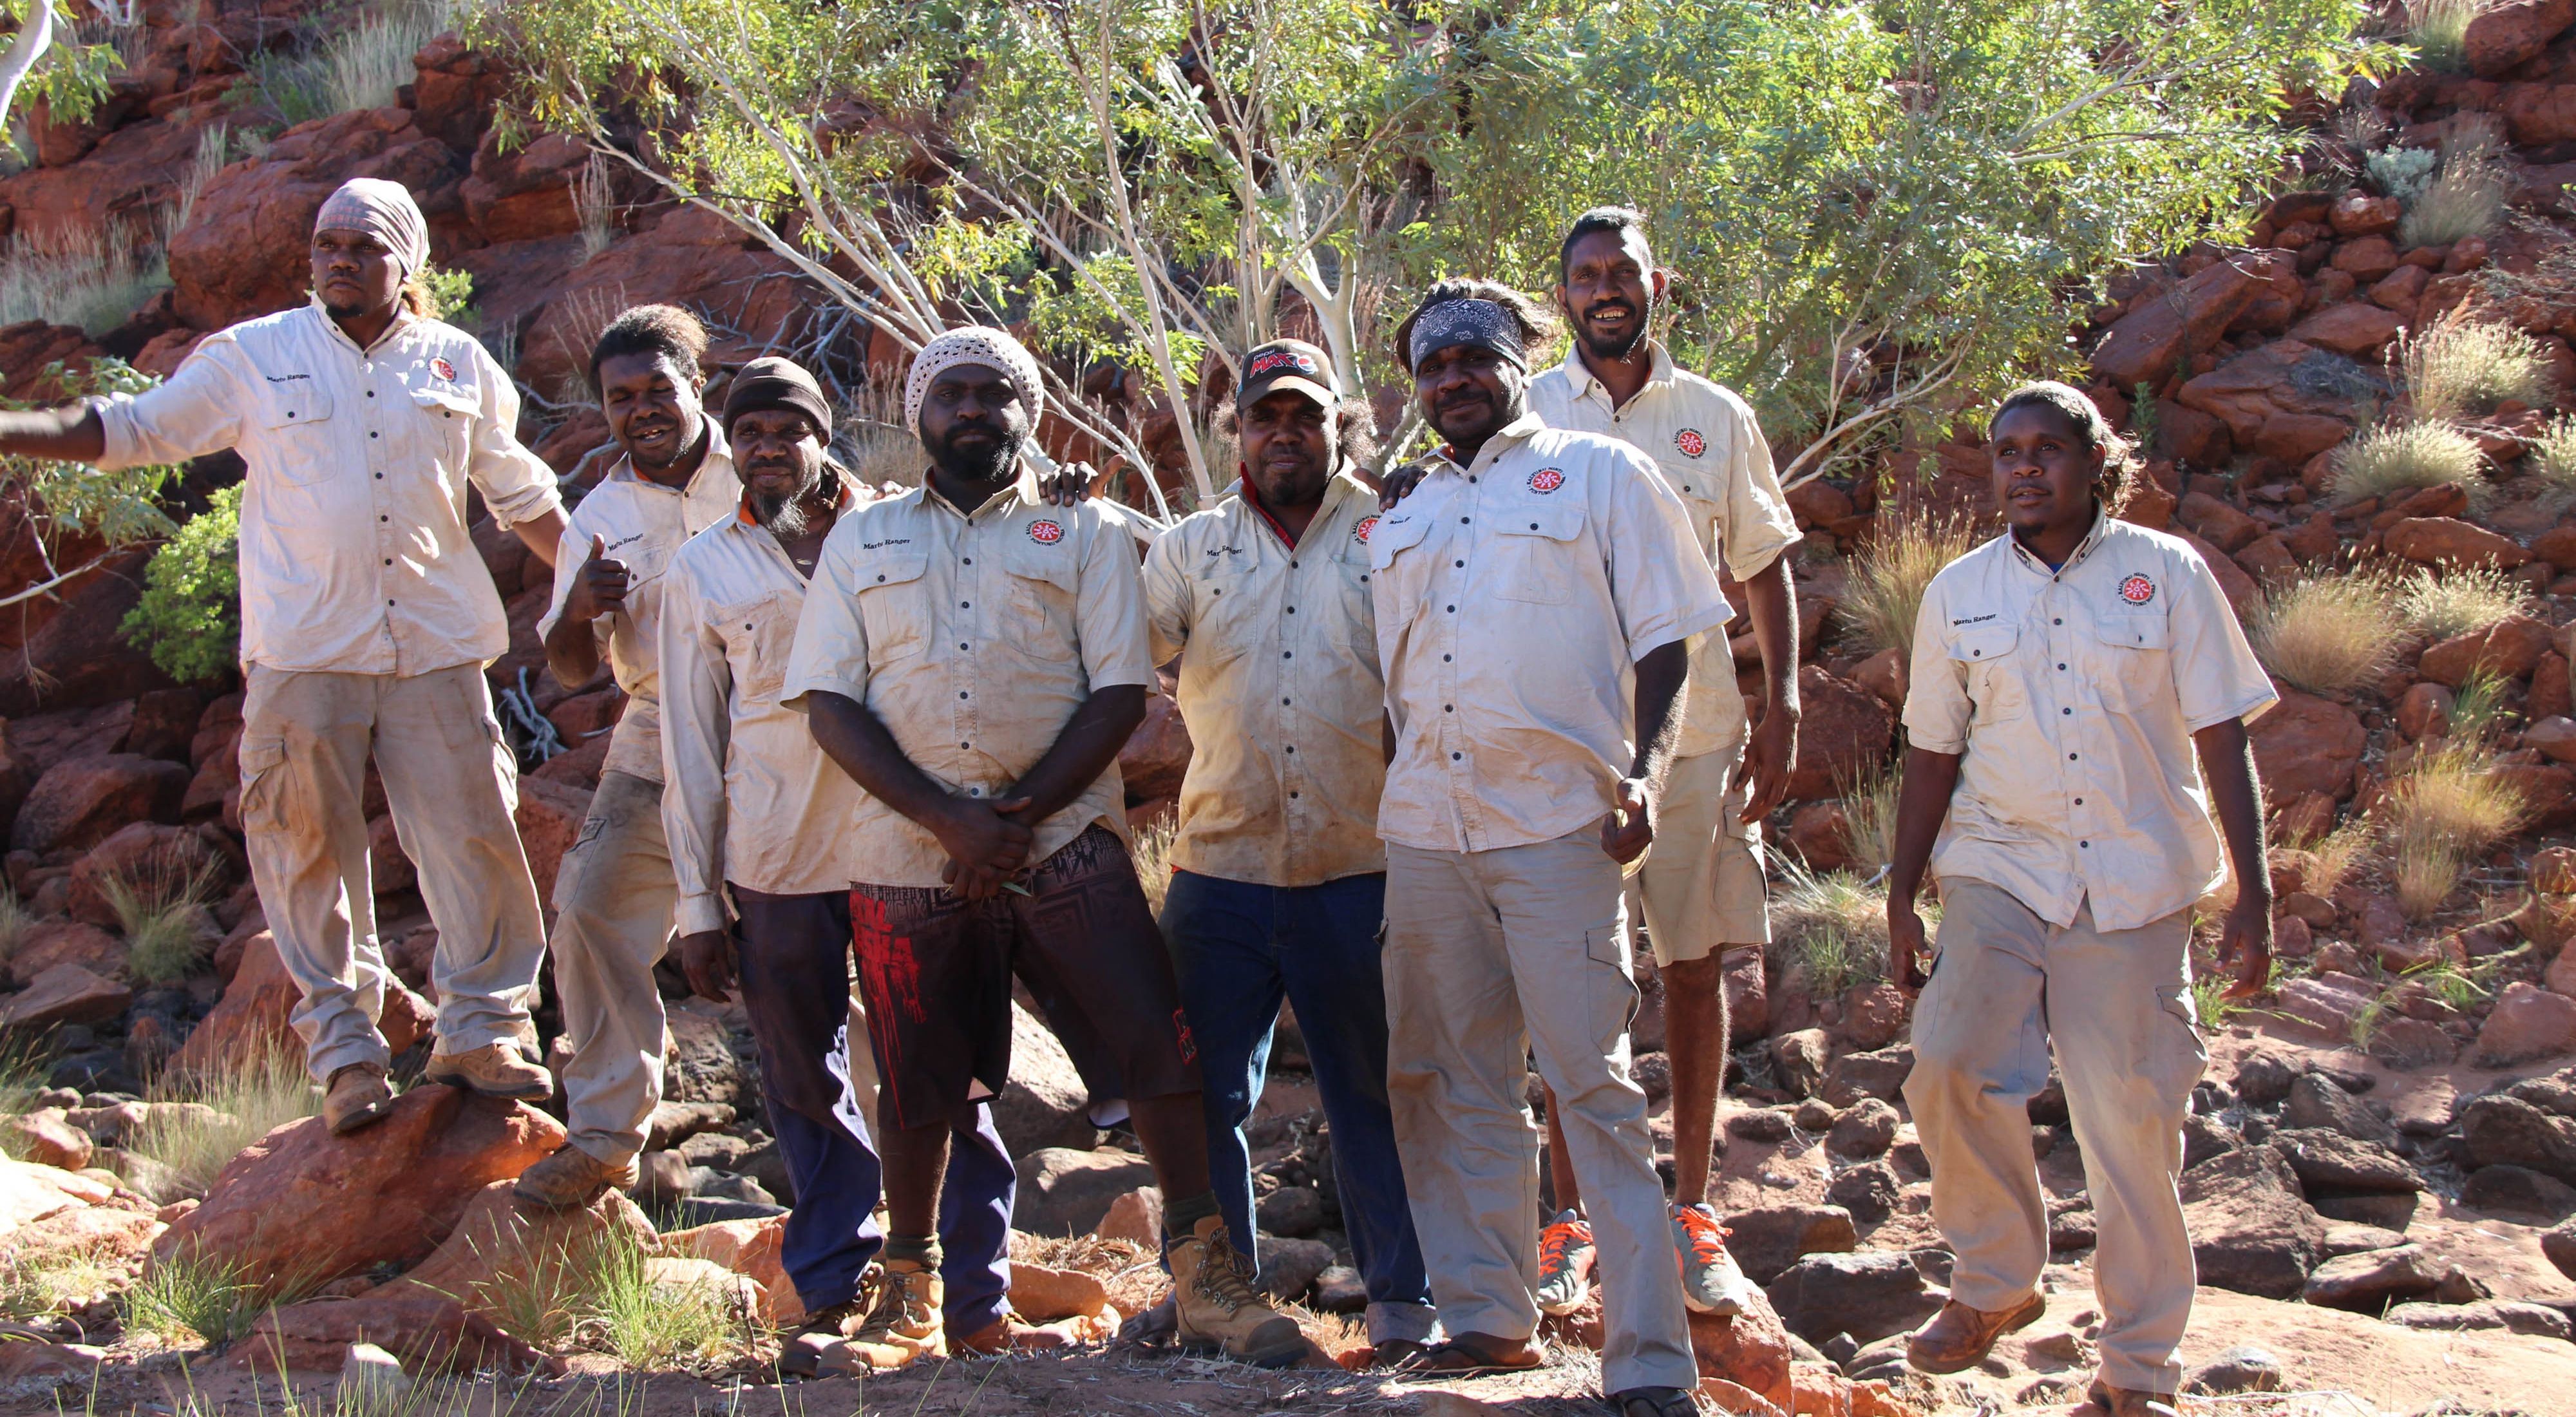 KJ Rangers work in Martu Country, the Australian outback to help keep Country healthy for people and nature